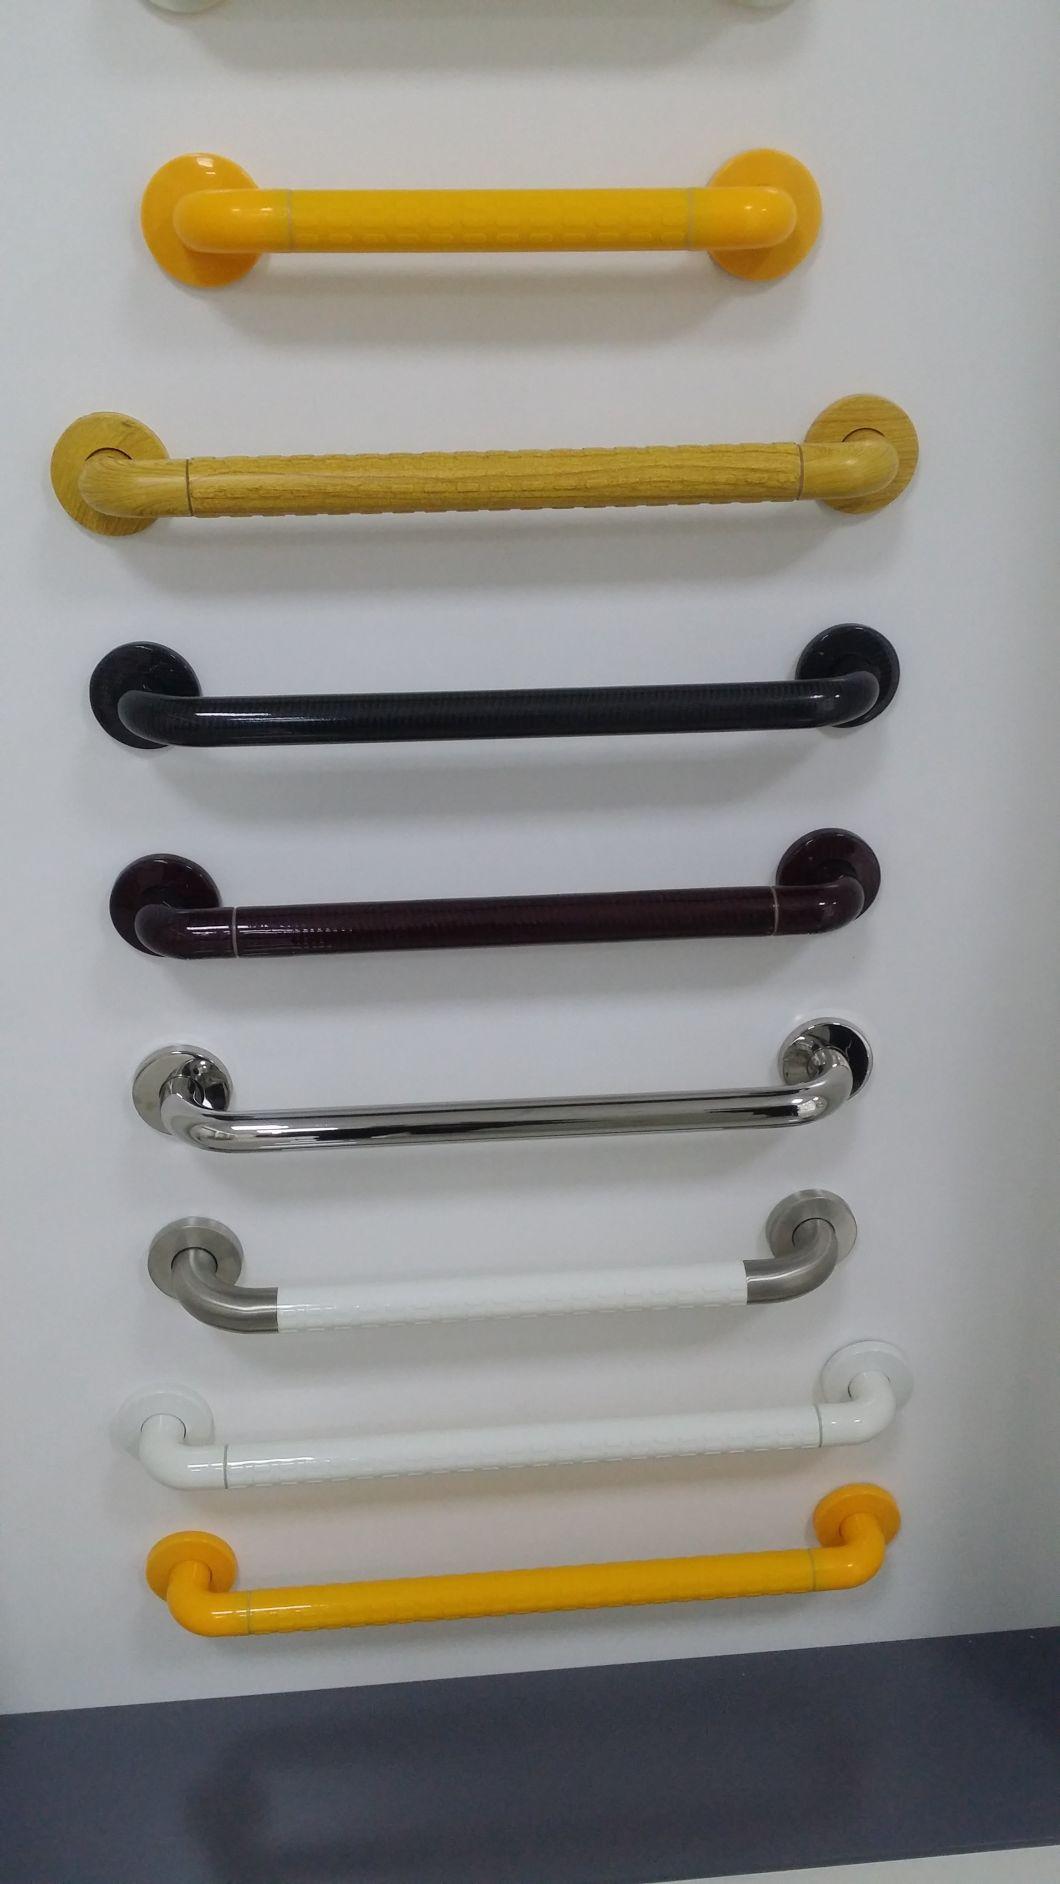 White and Yellow Nylon and Stainless Steel Bathroom Handrail